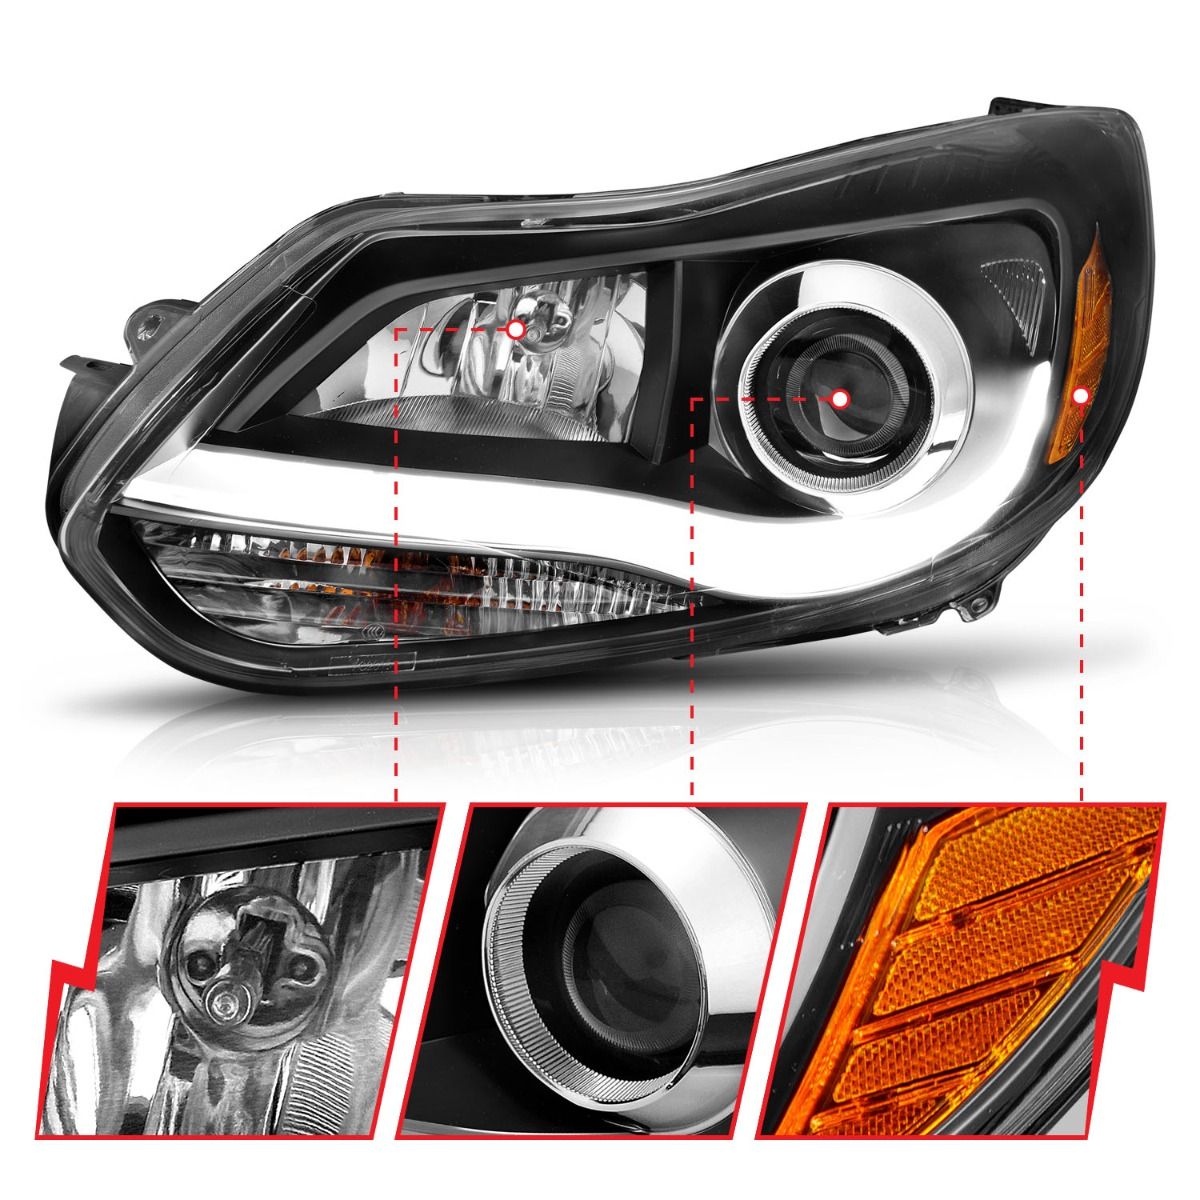 Ford Projector Headlights, Ford Focus Headlights, Focus 12-14 Headlights, Projector Headlights, Plank Style Headlights, Black Projector Headlights, Anzo Projector Headlights